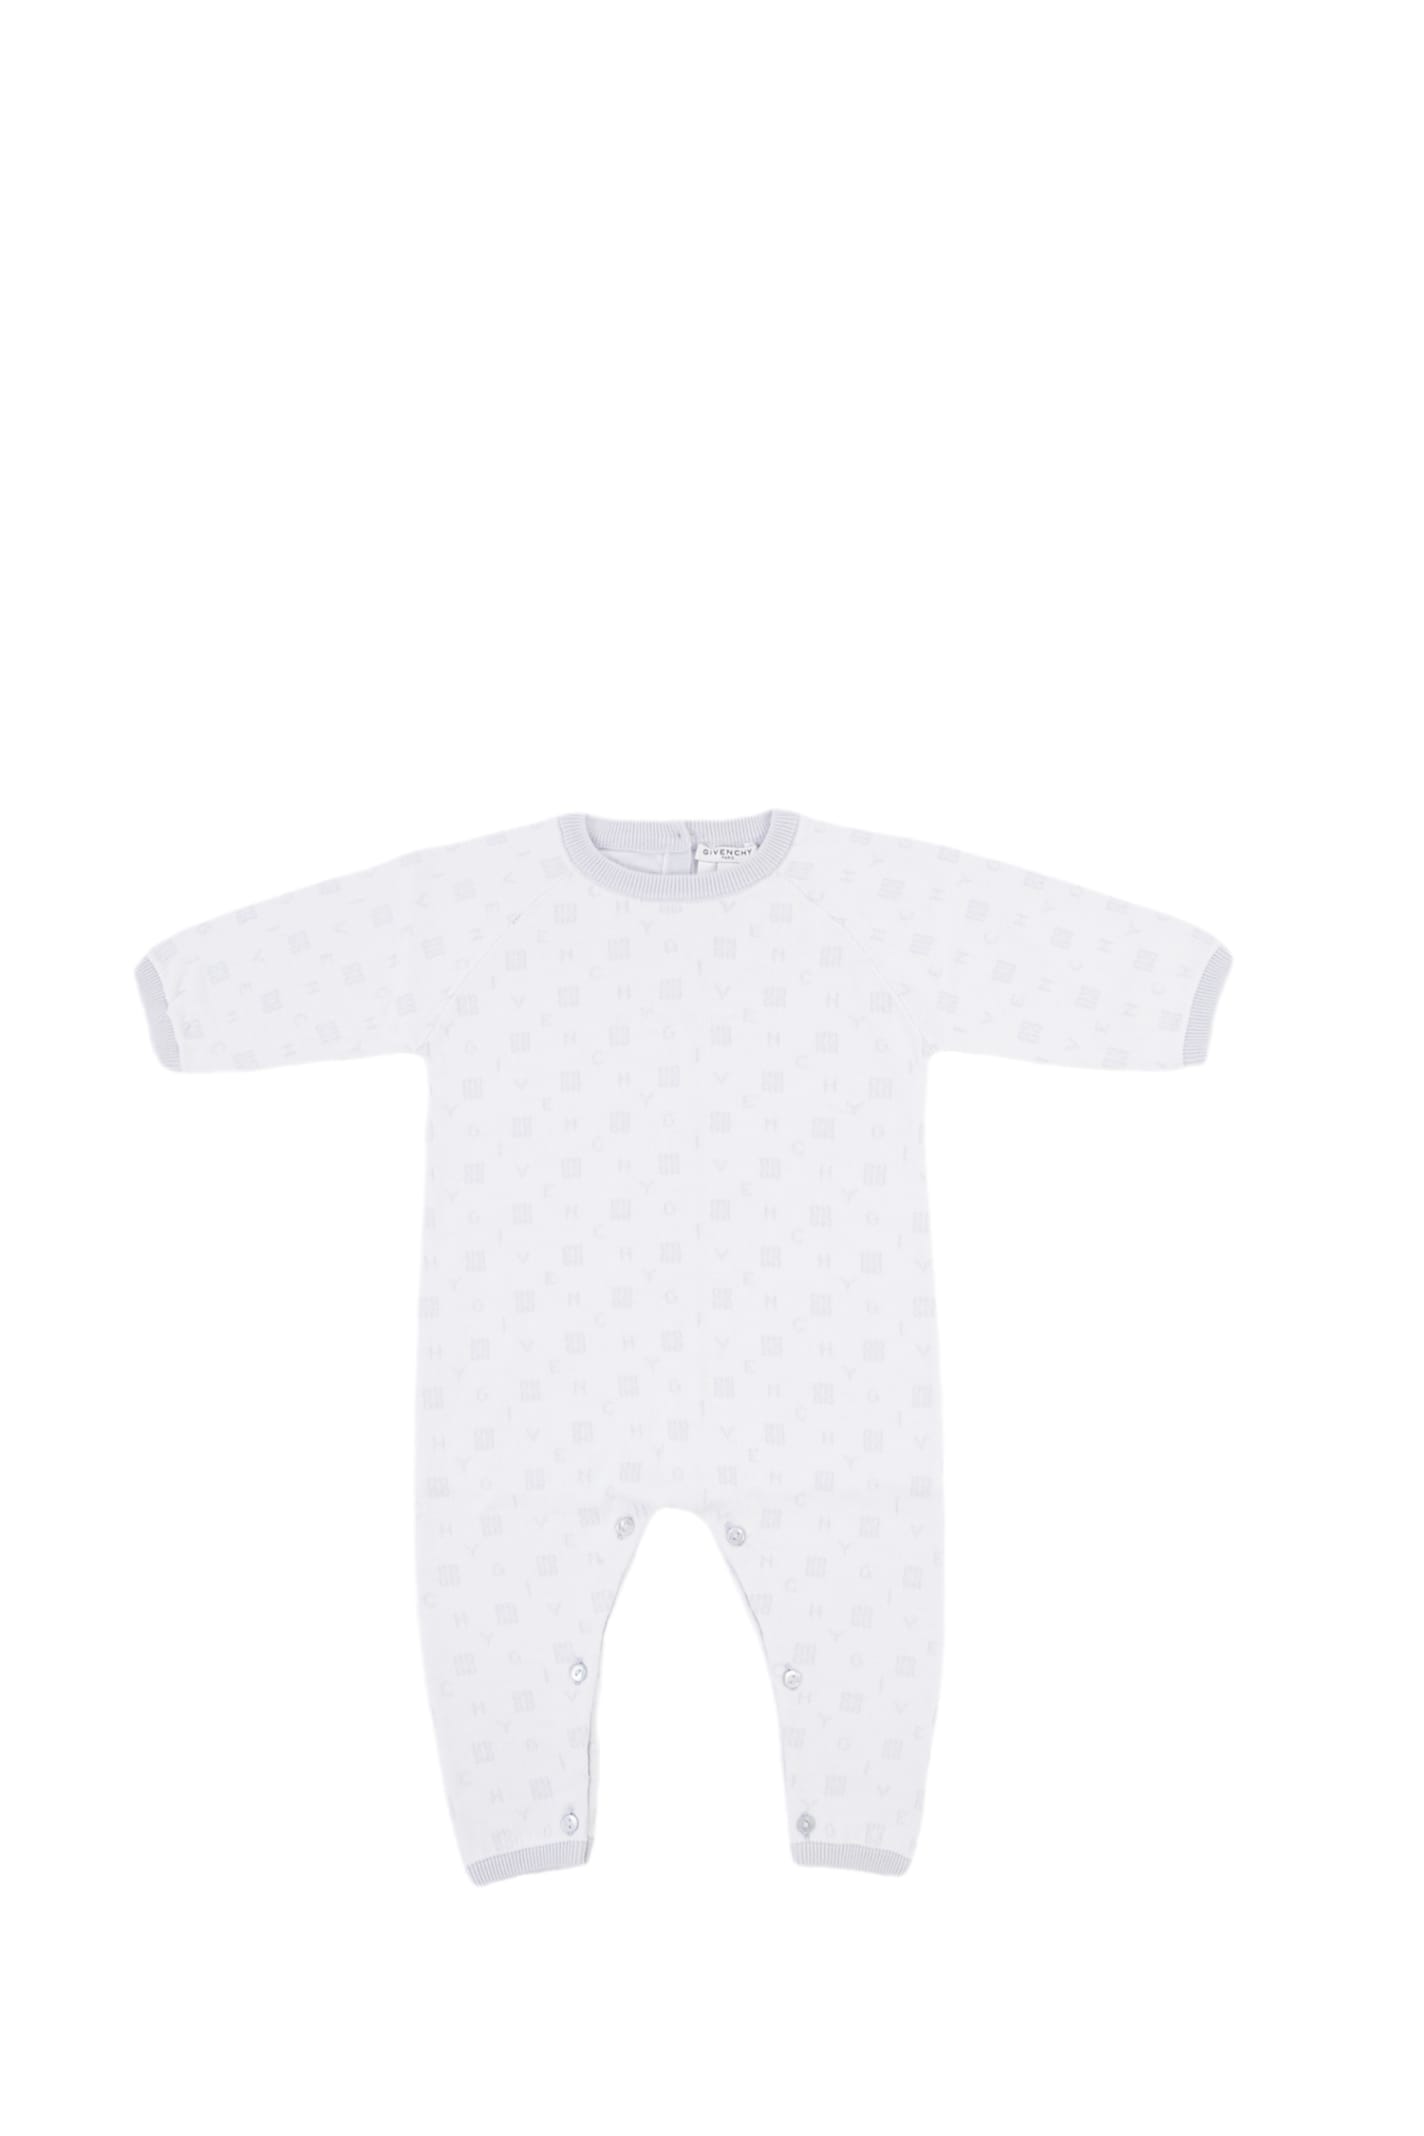 Givenchy Kids' Cotton Romper